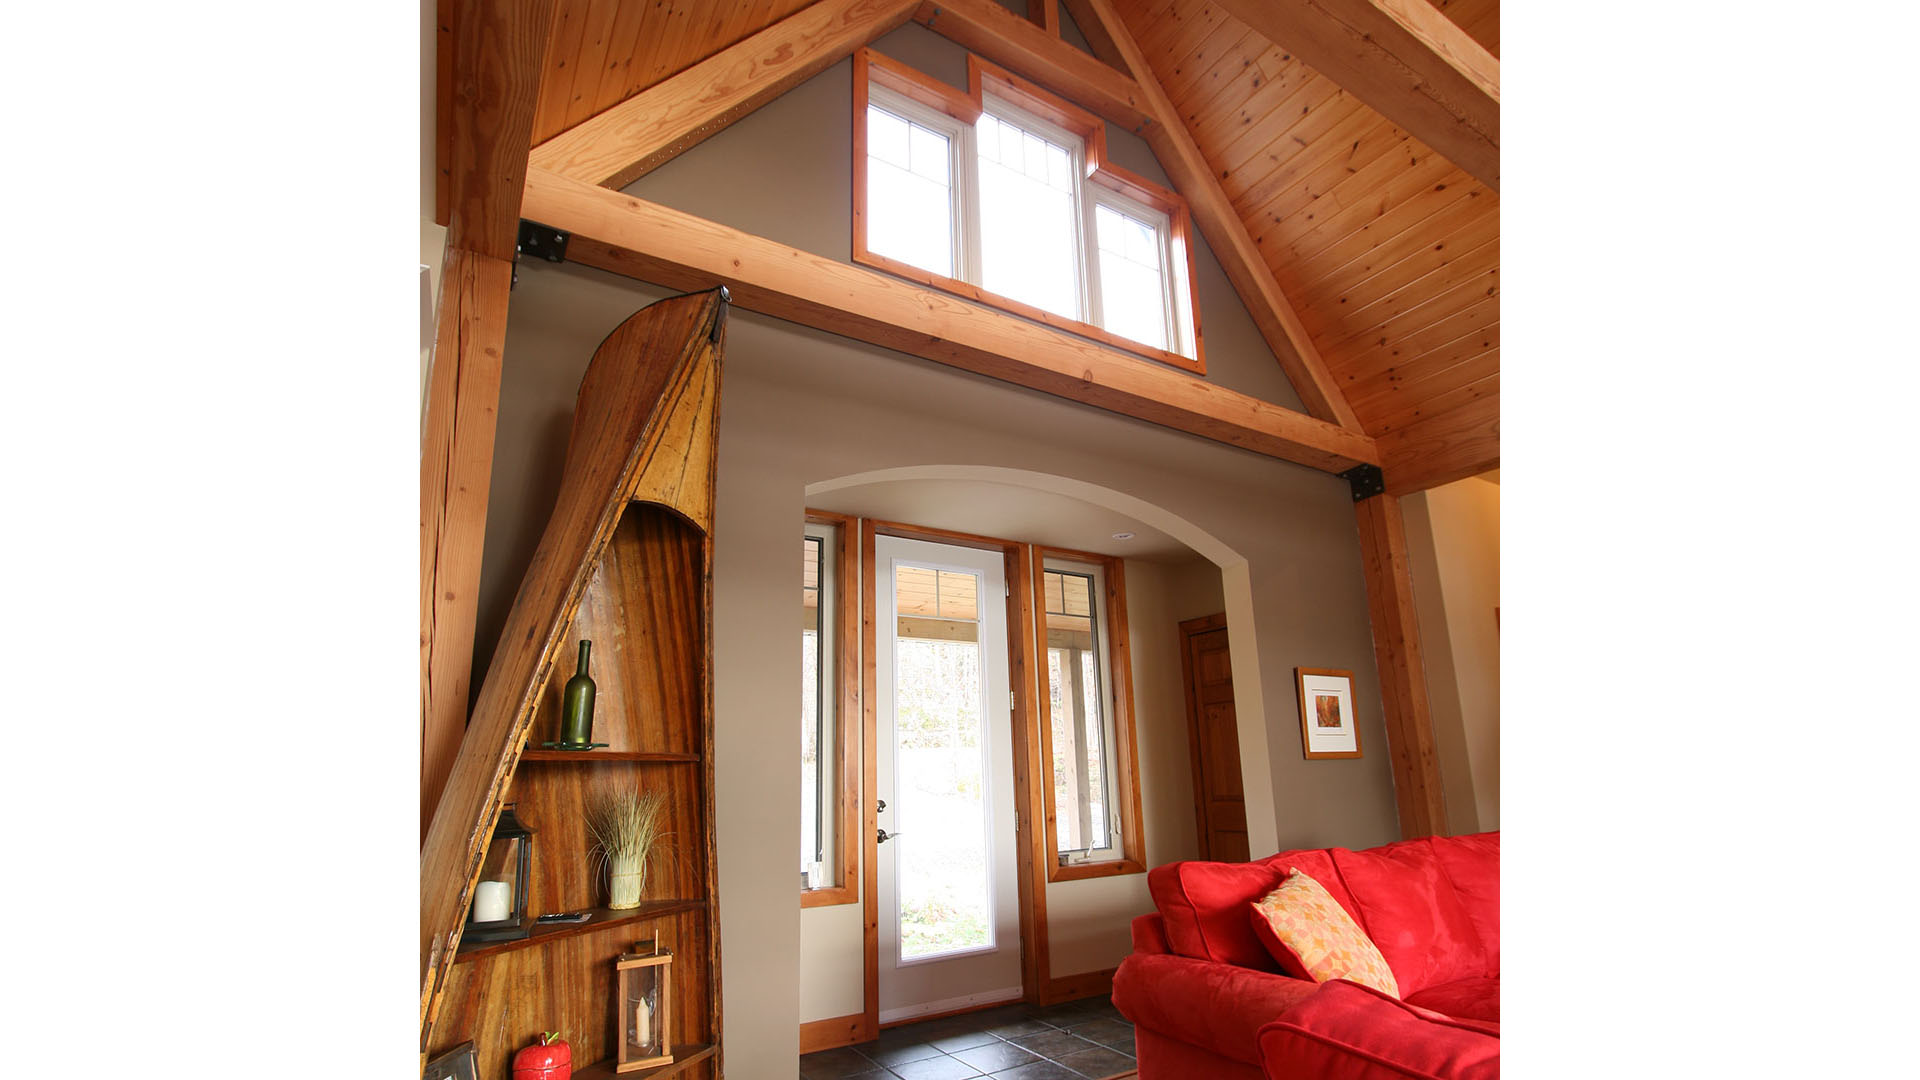 architect designed new lakefront cottage - parry sound - timber-frame family room